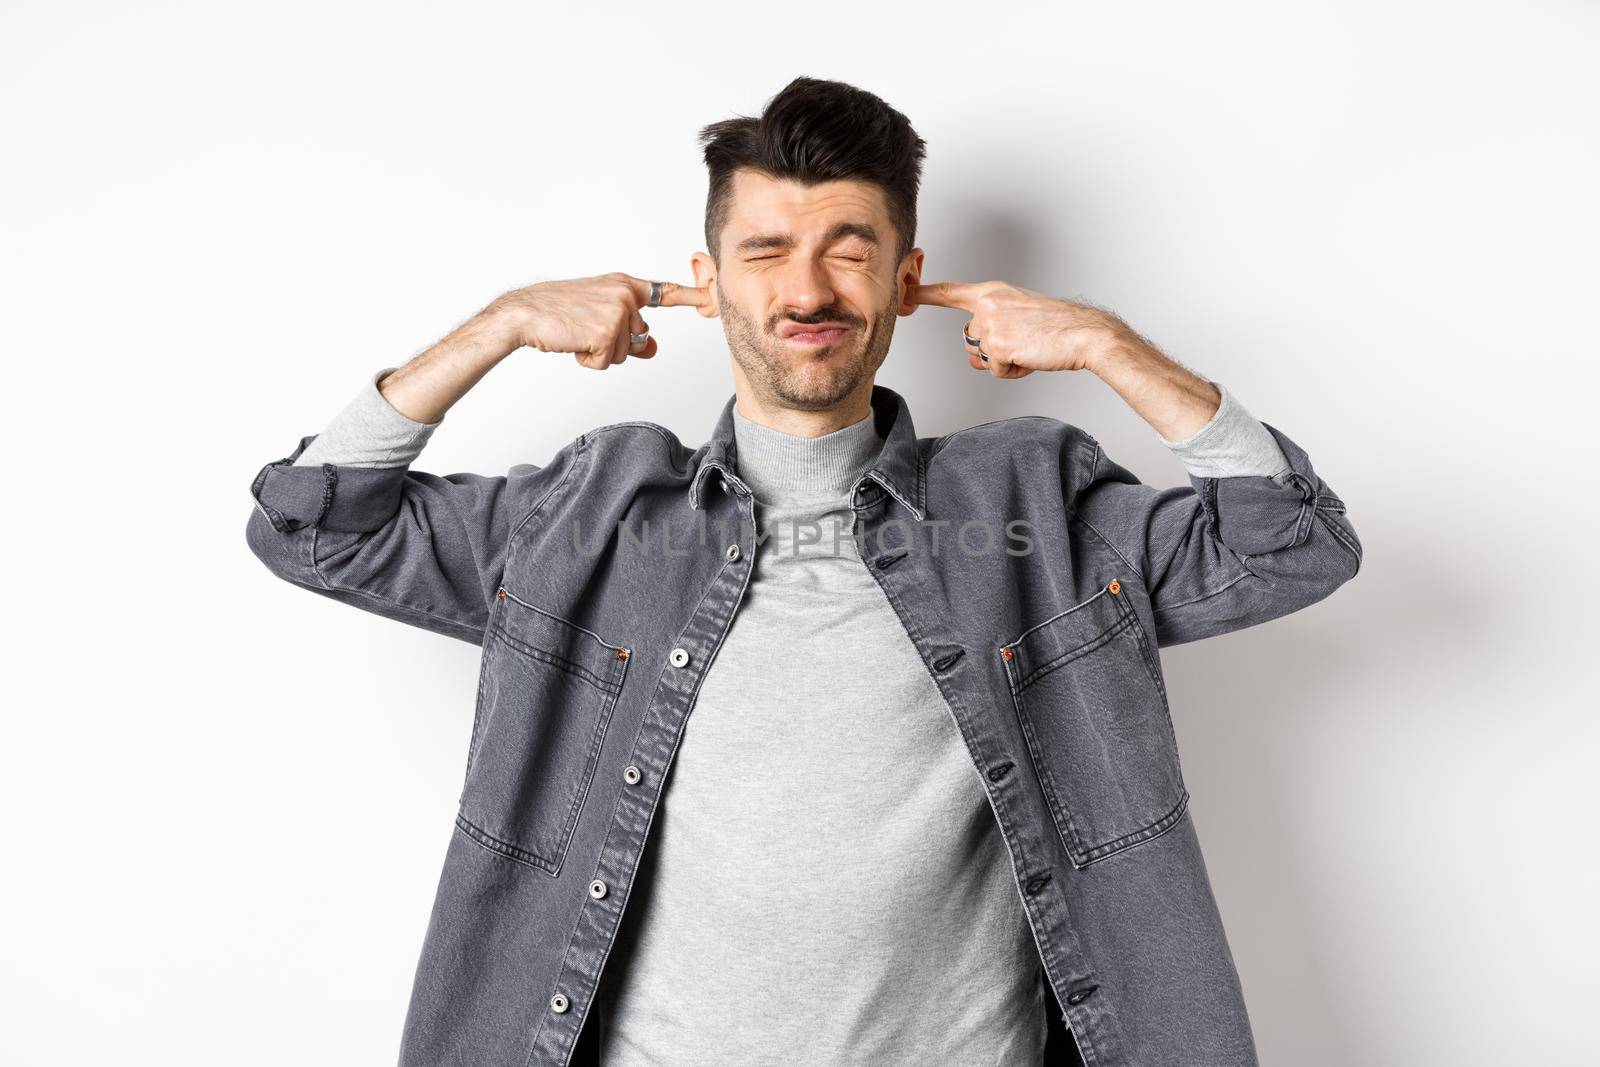 Annoyed young man plug ears with fingers and grimacing from loud noise, disturbed by noisy neighbours, standing at loud place on white background.